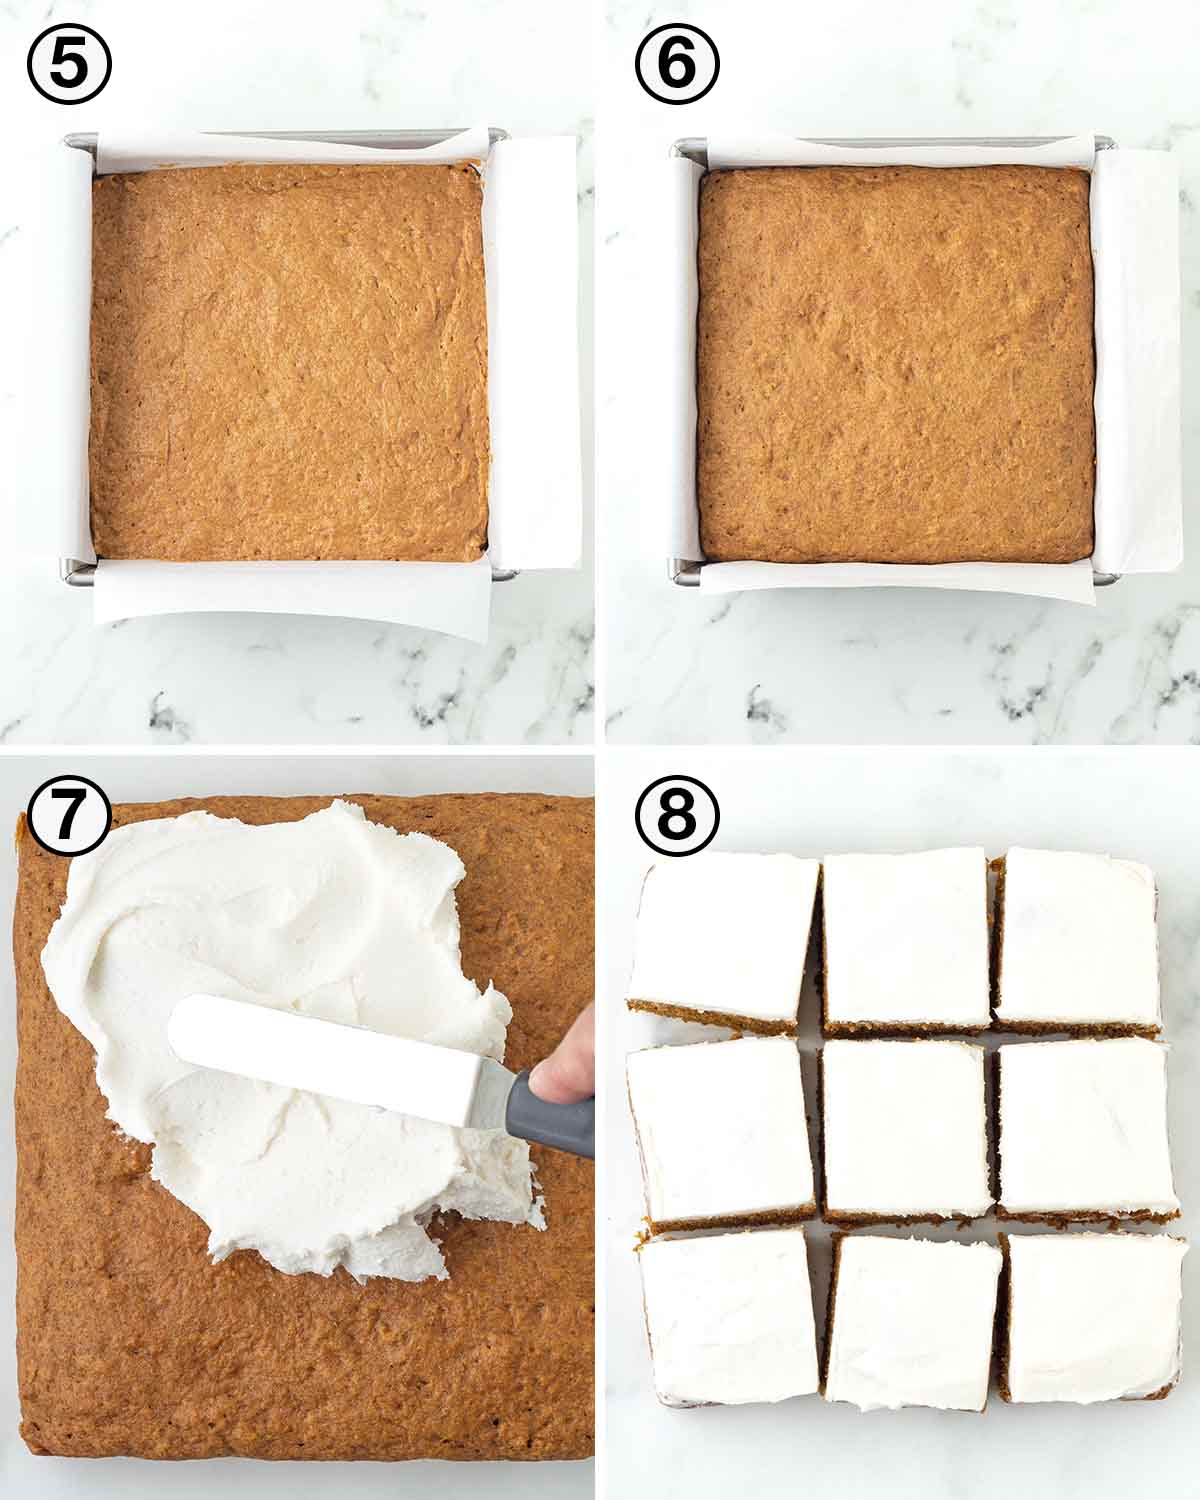 A collage of four images showing the first sequence of steps needed to make vegan pumpkin bars.